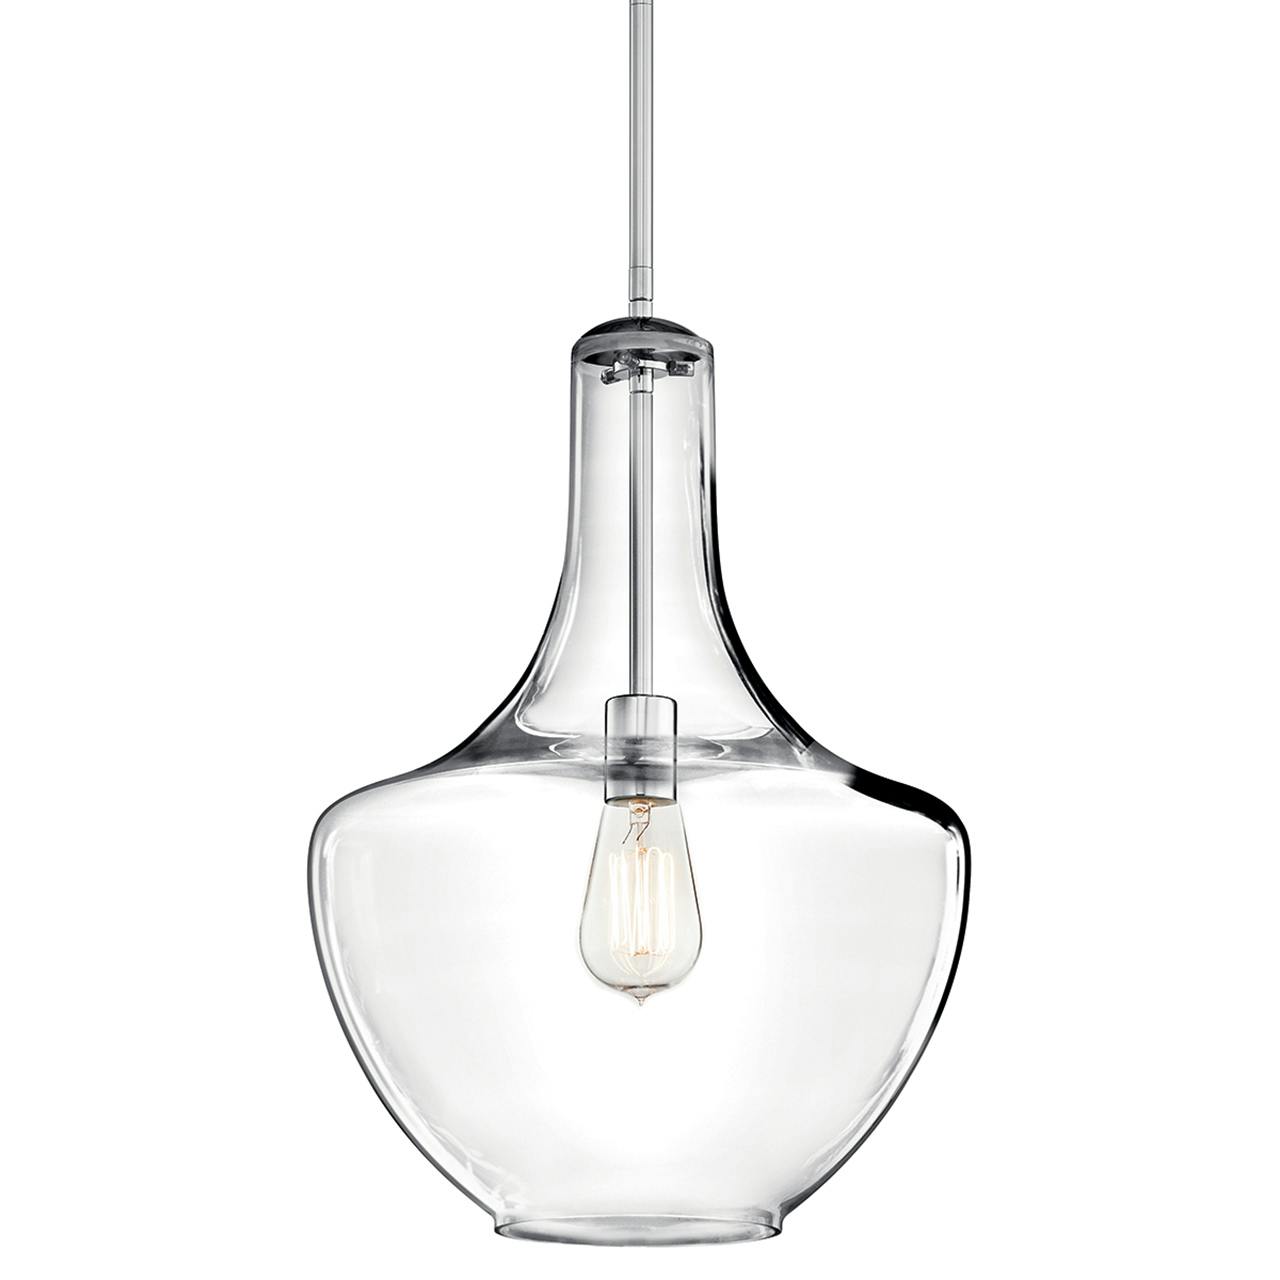 Everly™ 19.75" Pendant Clear Glass Chrome without the canopy on a white background